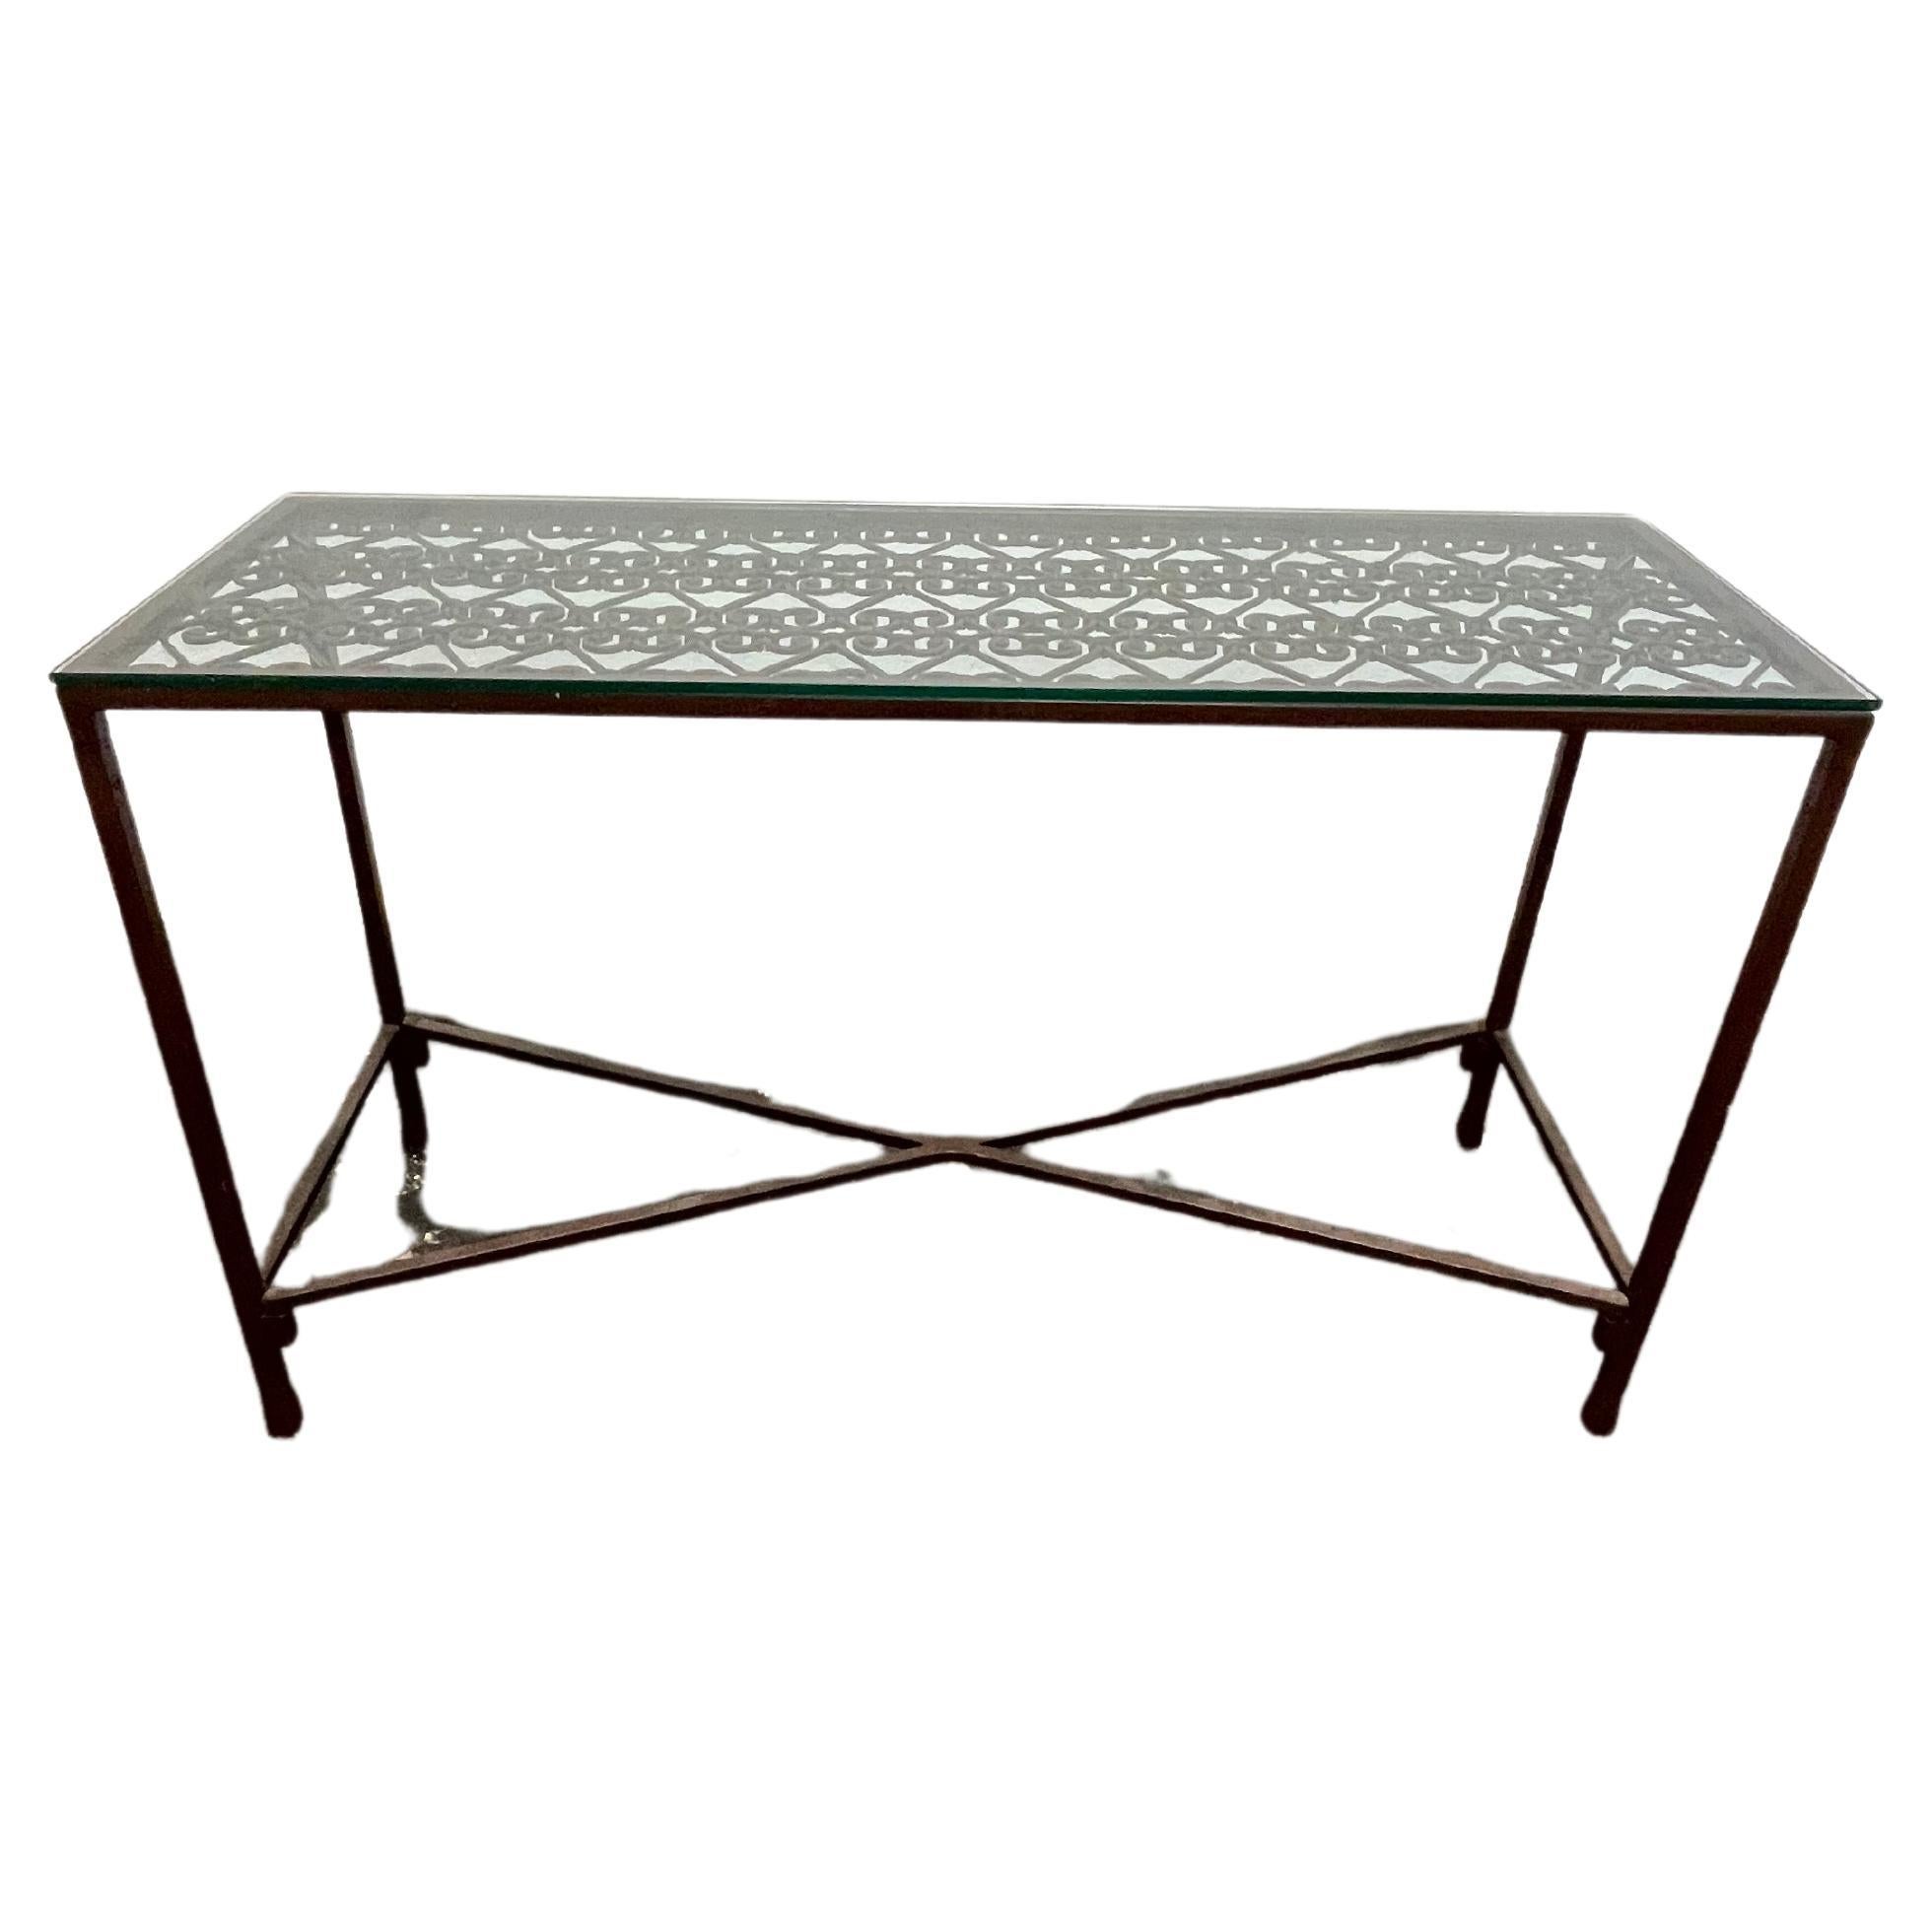 Vintage French Iron Gate Console Table Glass Top For Sale